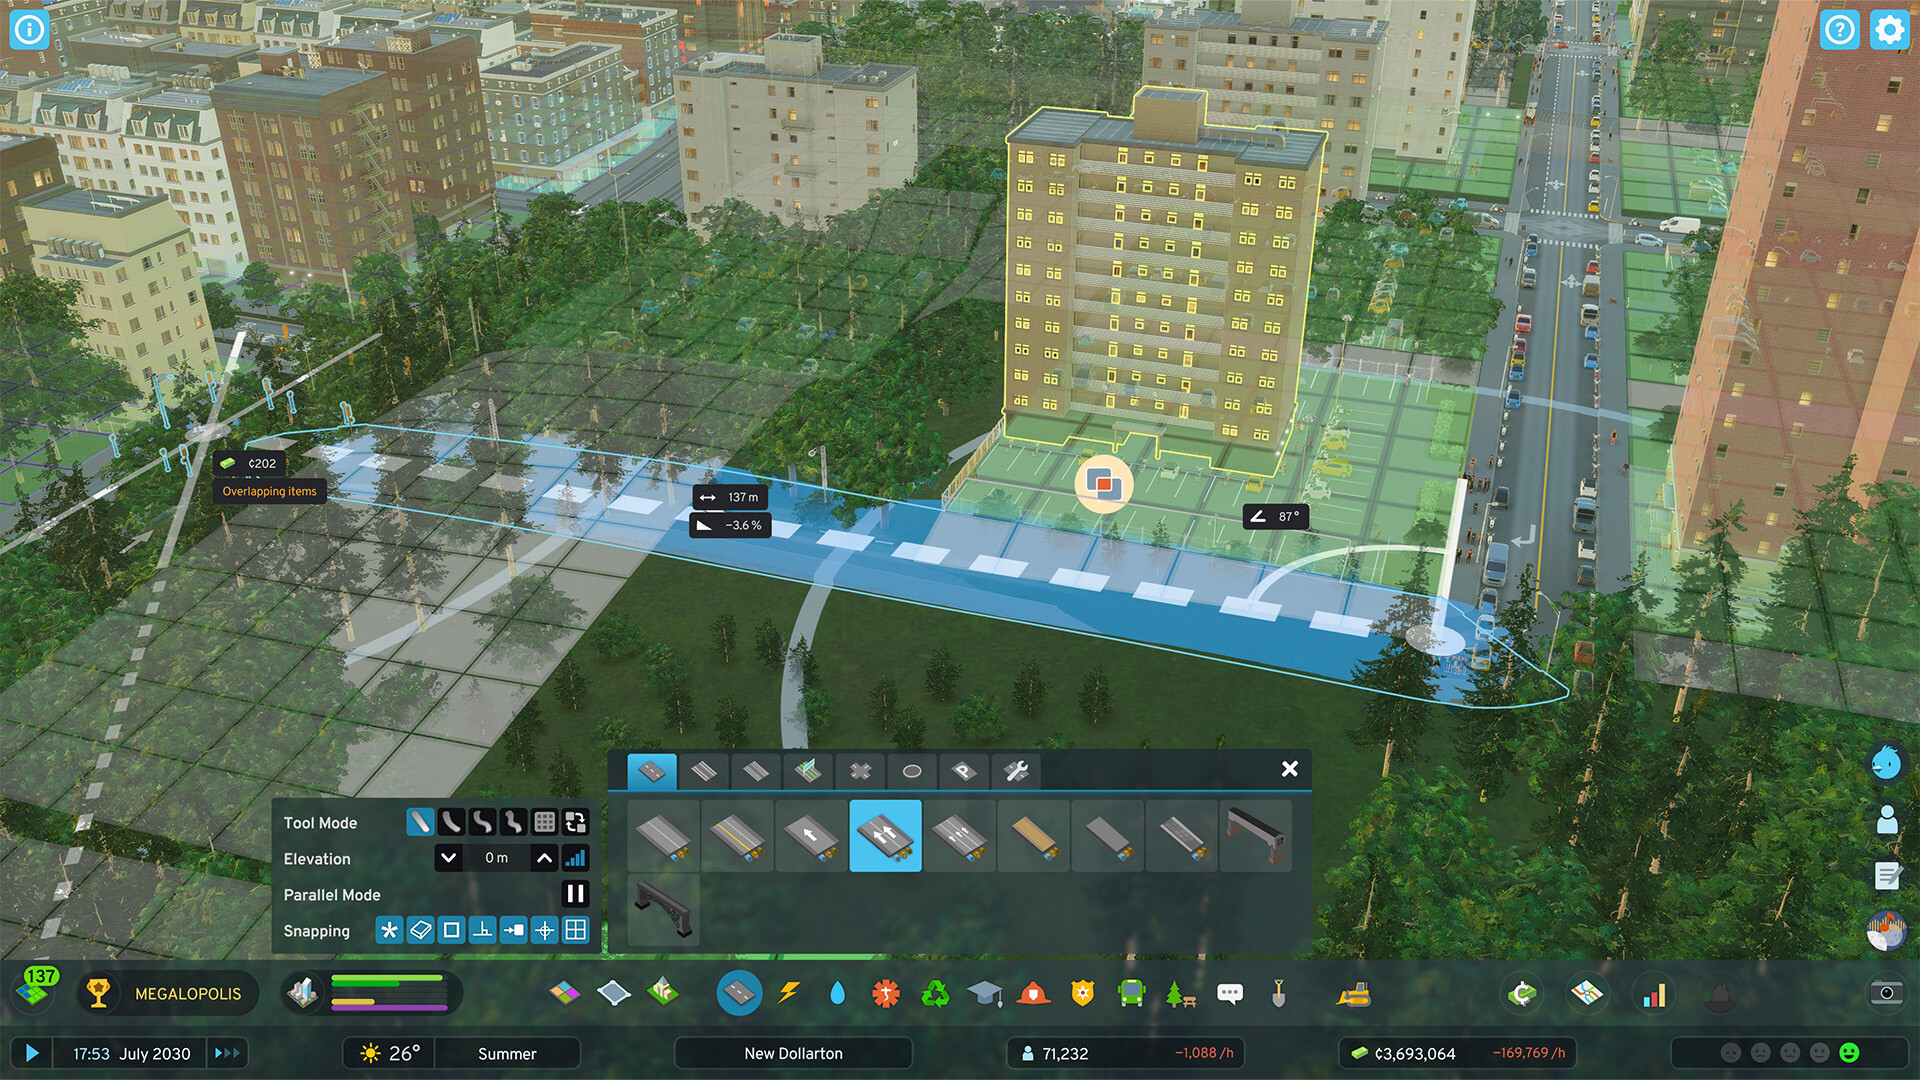 Cities: Skylines 2 will offer more building options and improved graphics